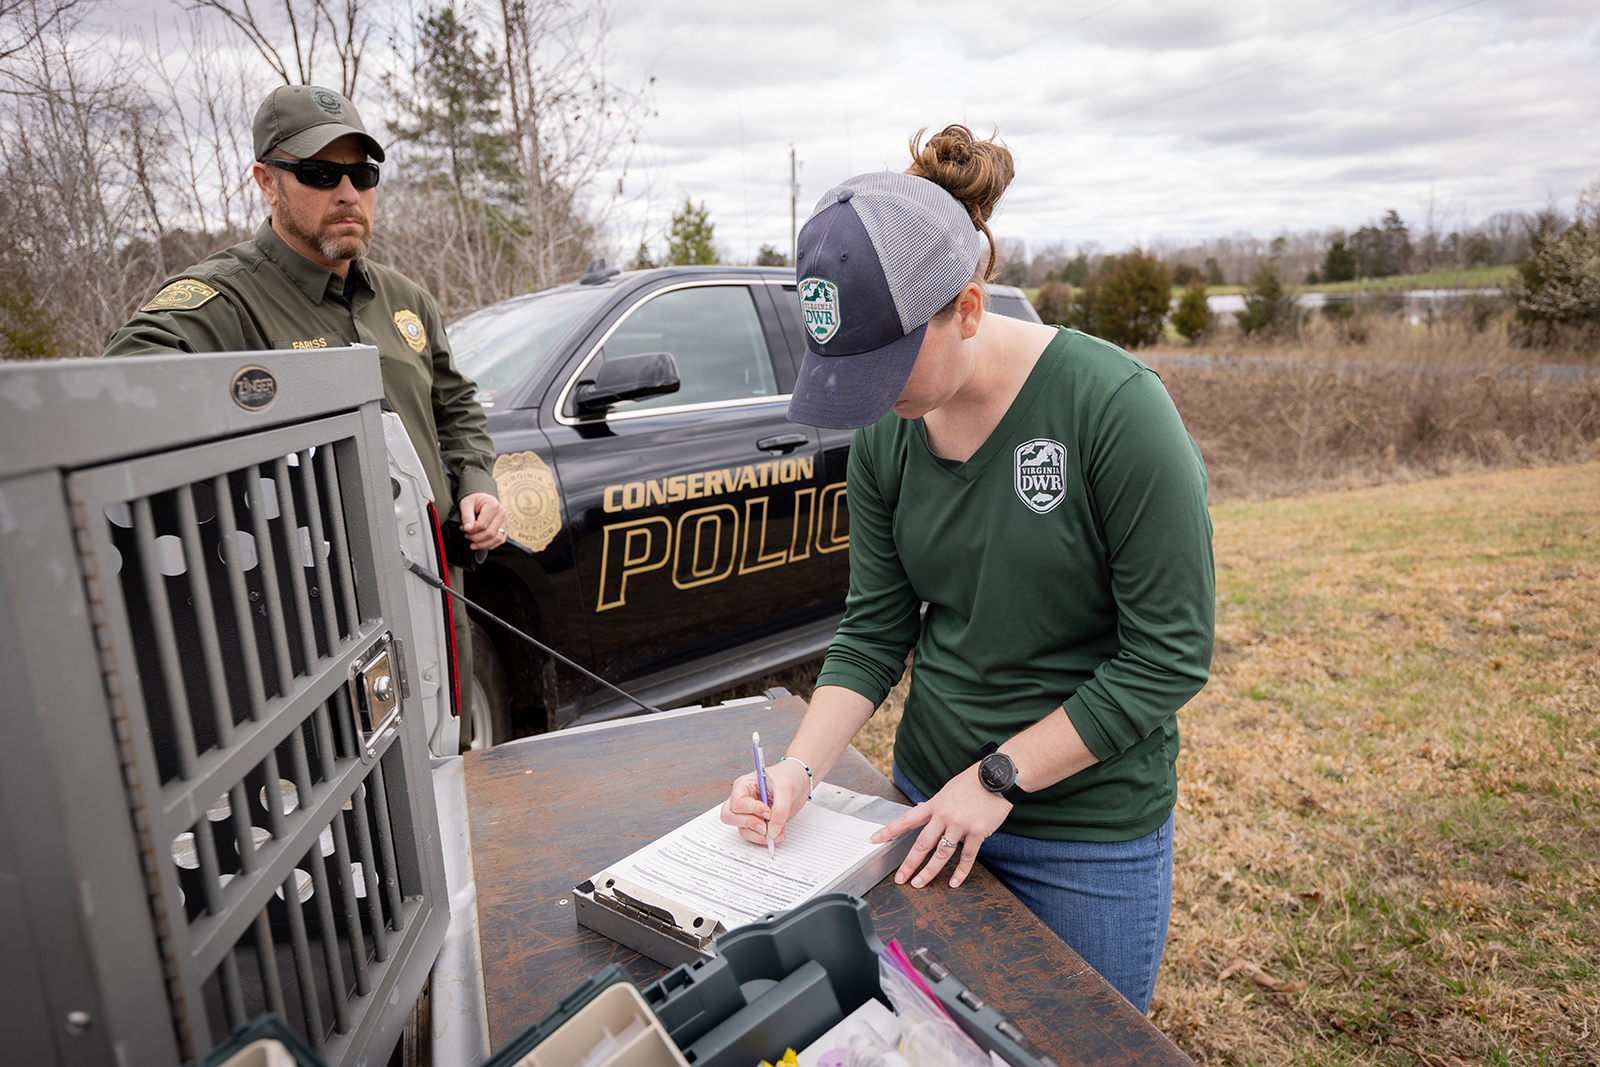 A photo of a DWR wildlife professional writing on a clipboard on a truck tailgate, with a Conservation Police Officer in uniform looking on. 